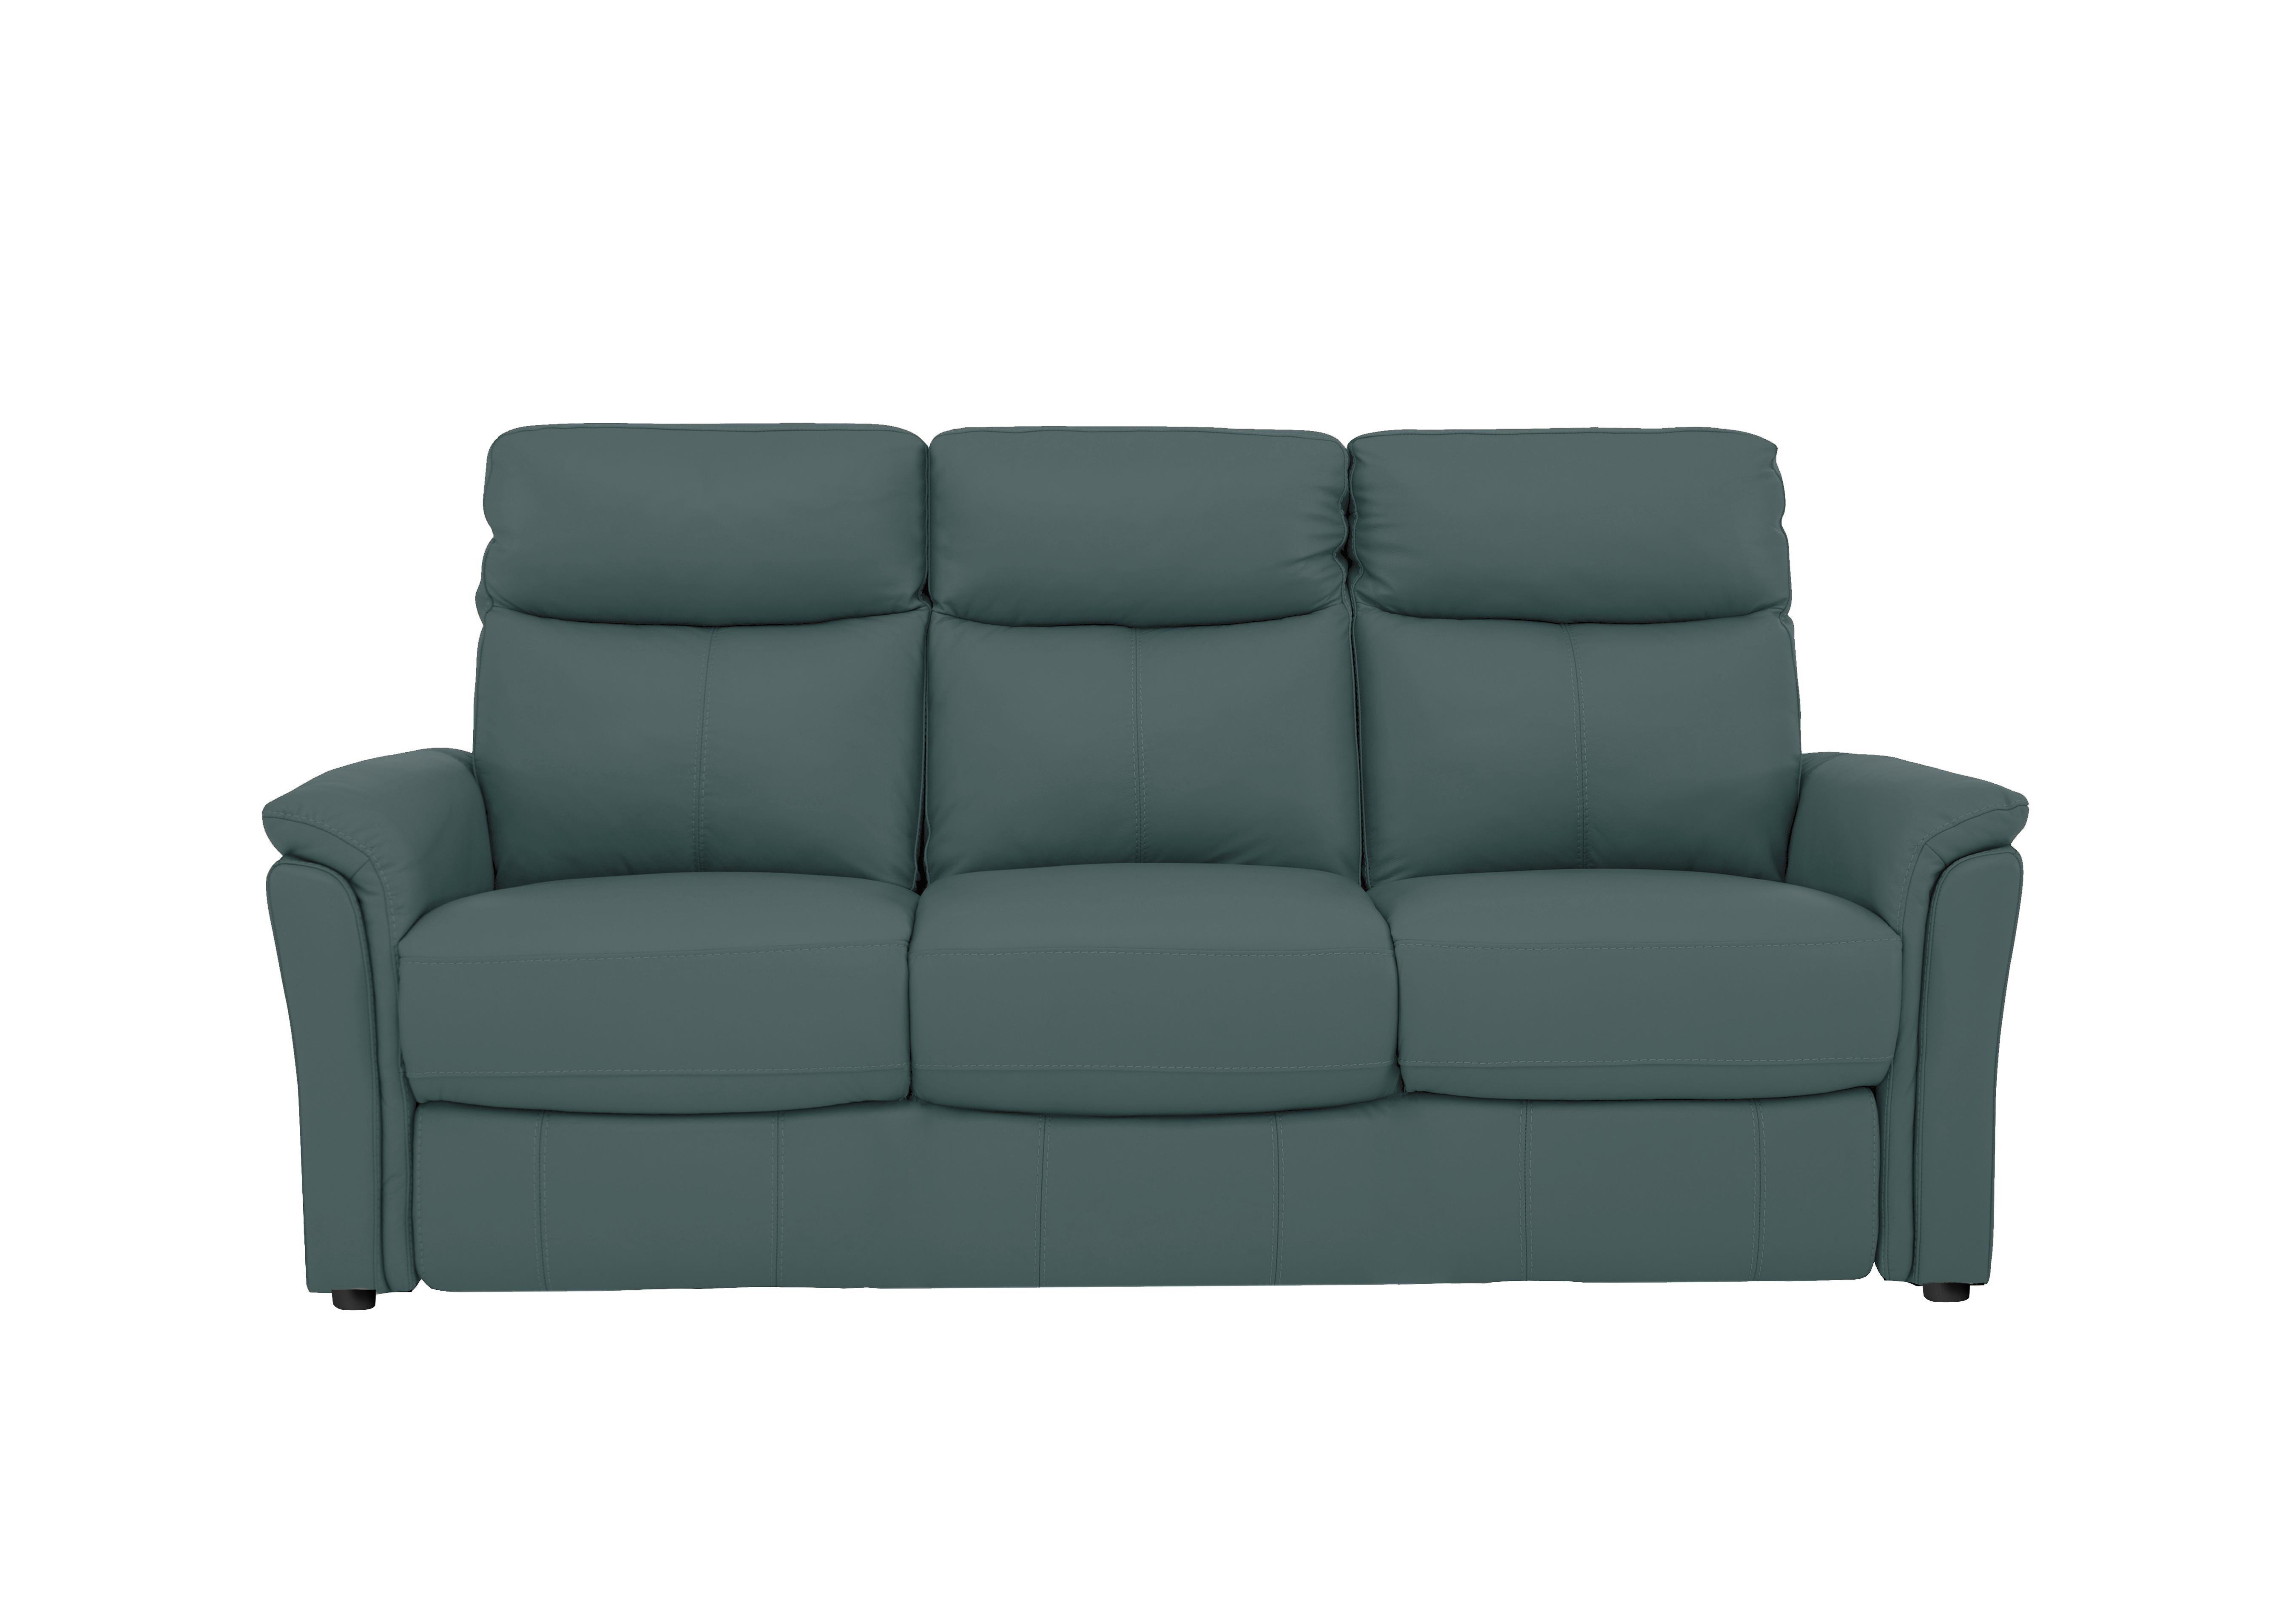 Compact Collection Piccolo 3 Seater Leather Static Sofa in Bv-301e Lake Green on Furniture Village